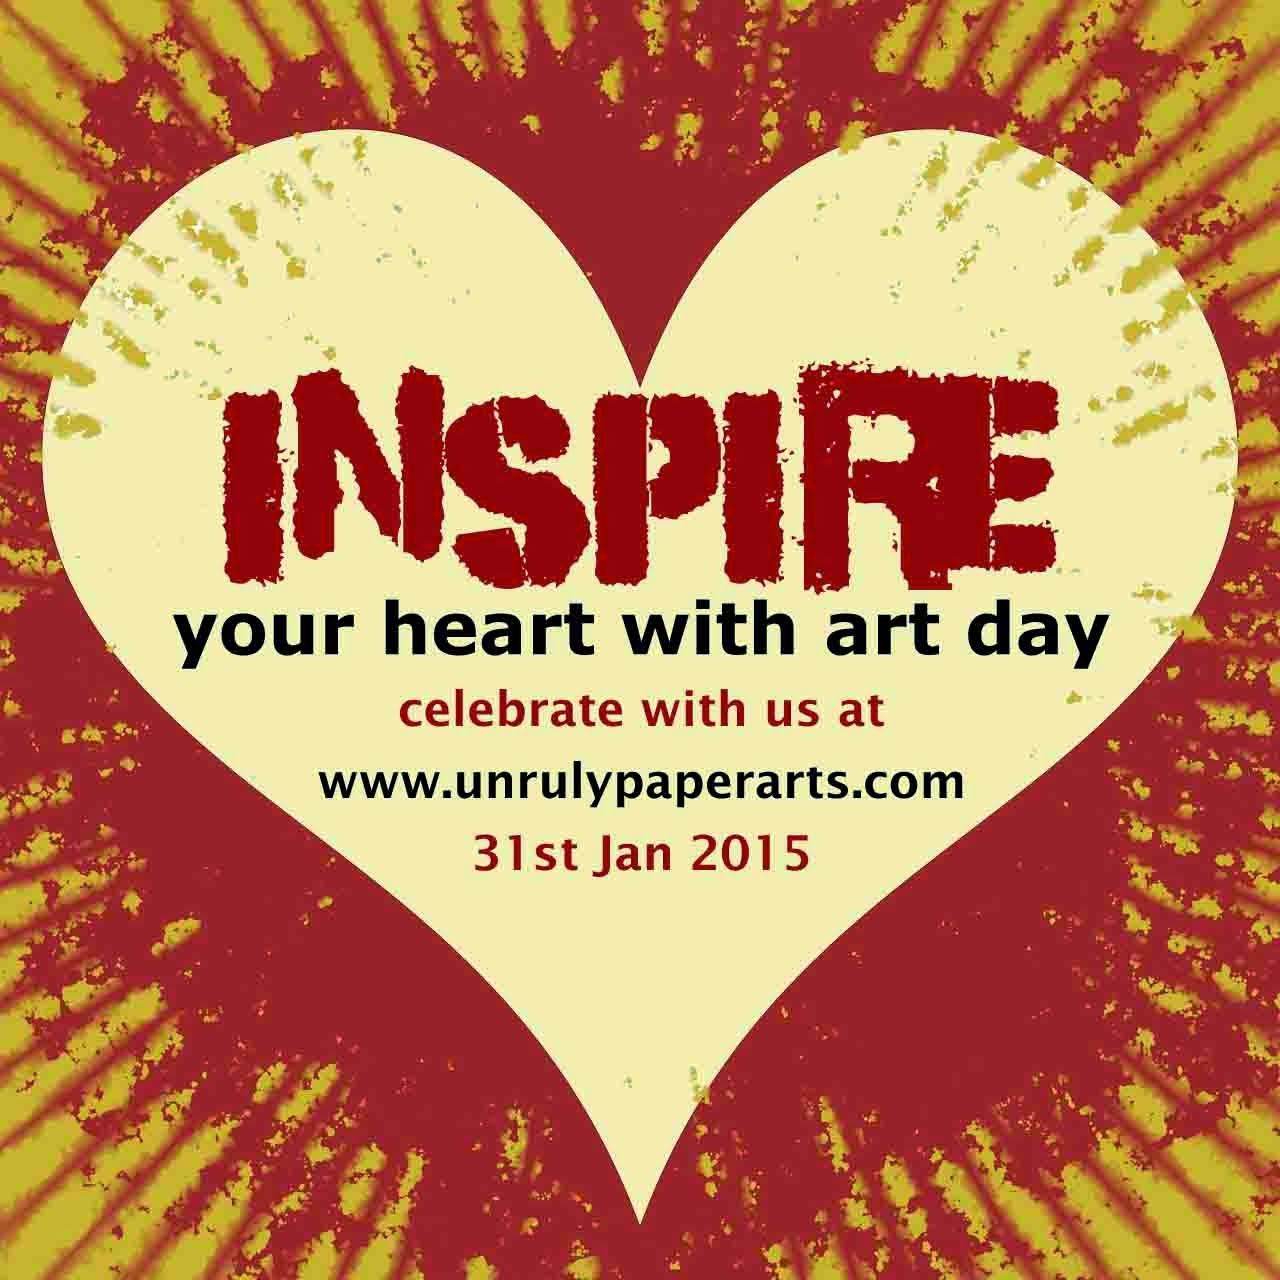 http://www.unrulypaperarts.com/2015/01/inspire-your-heart-with-art-day.html